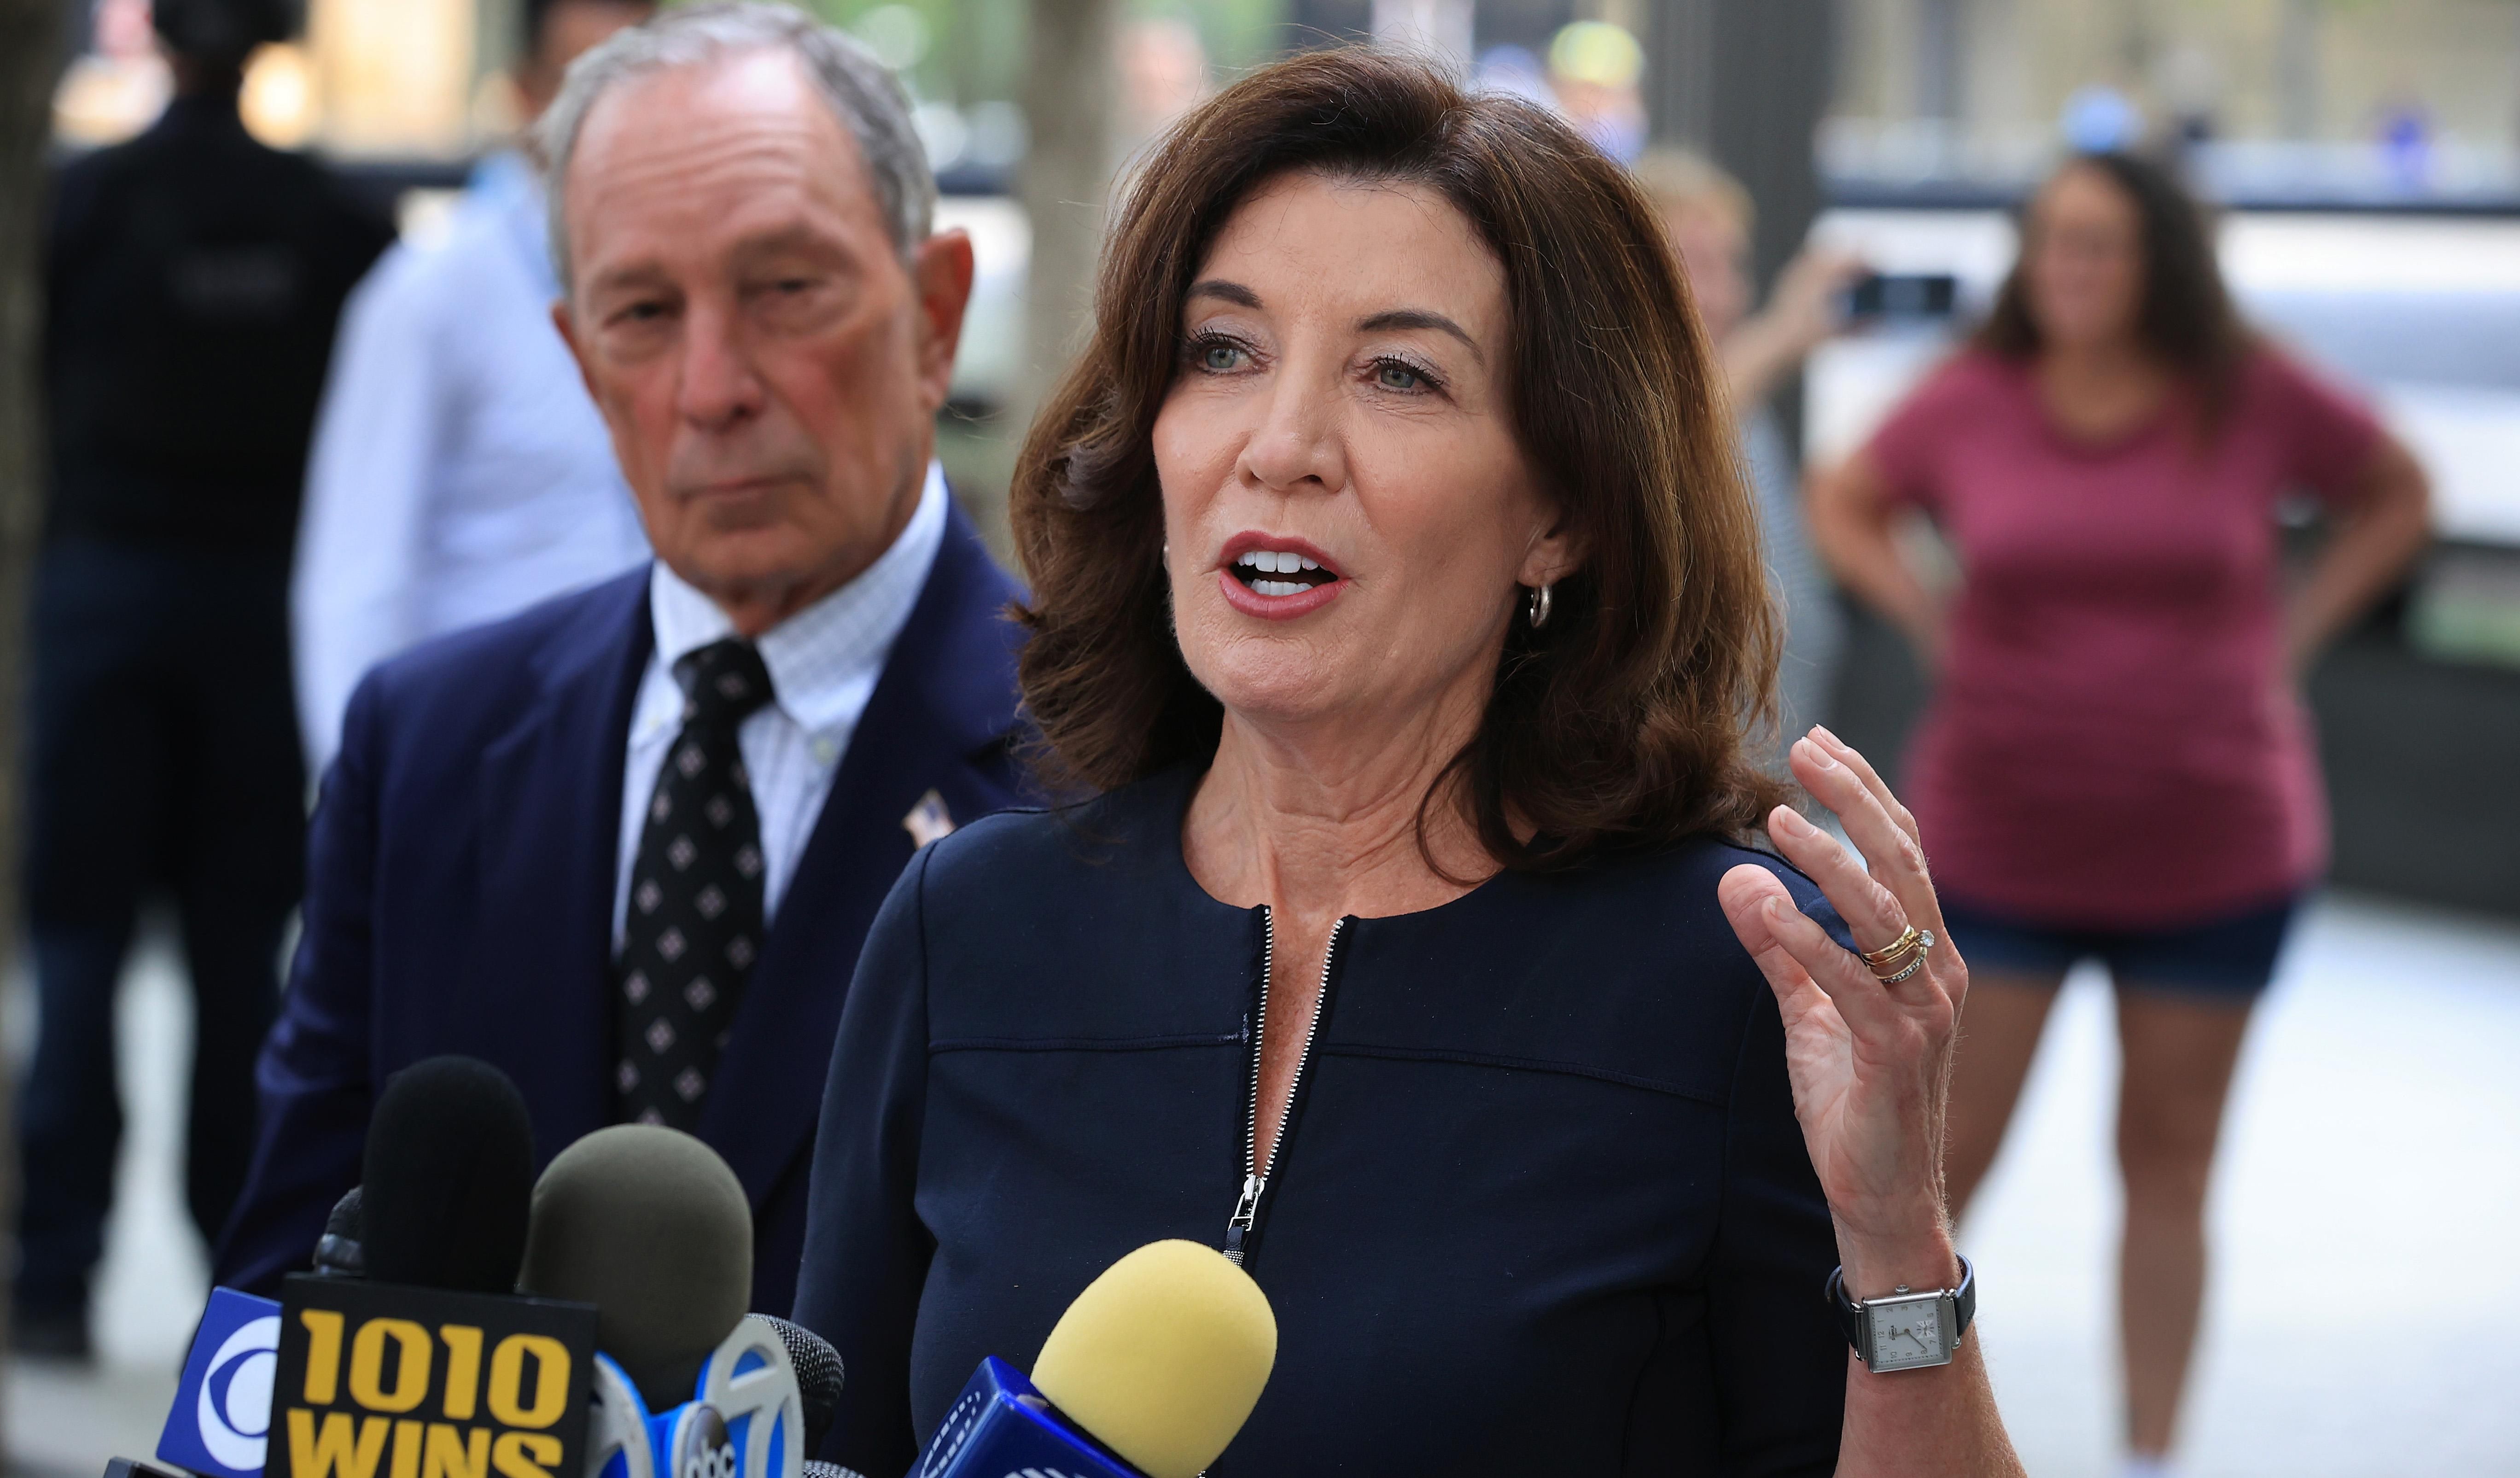 New York Gov. Kathy Hochul and former New York City Mayor Mike Bloomberg 